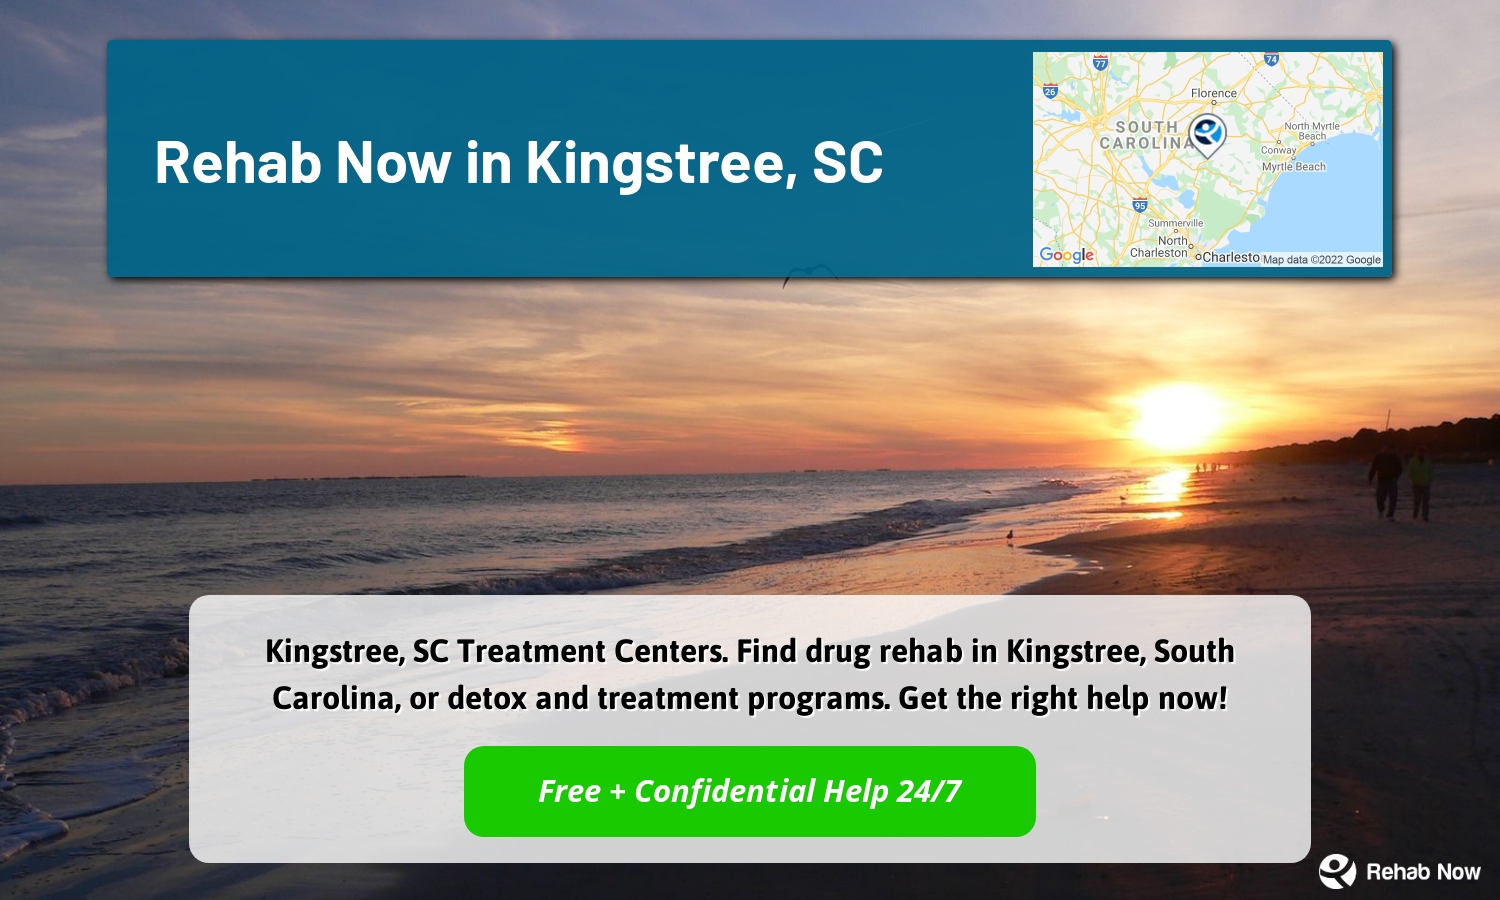 Kingstree, SC Treatment Centers. Find drug rehab in Kingstree, South Carolina, or detox and treatment programs. Get the right help now!